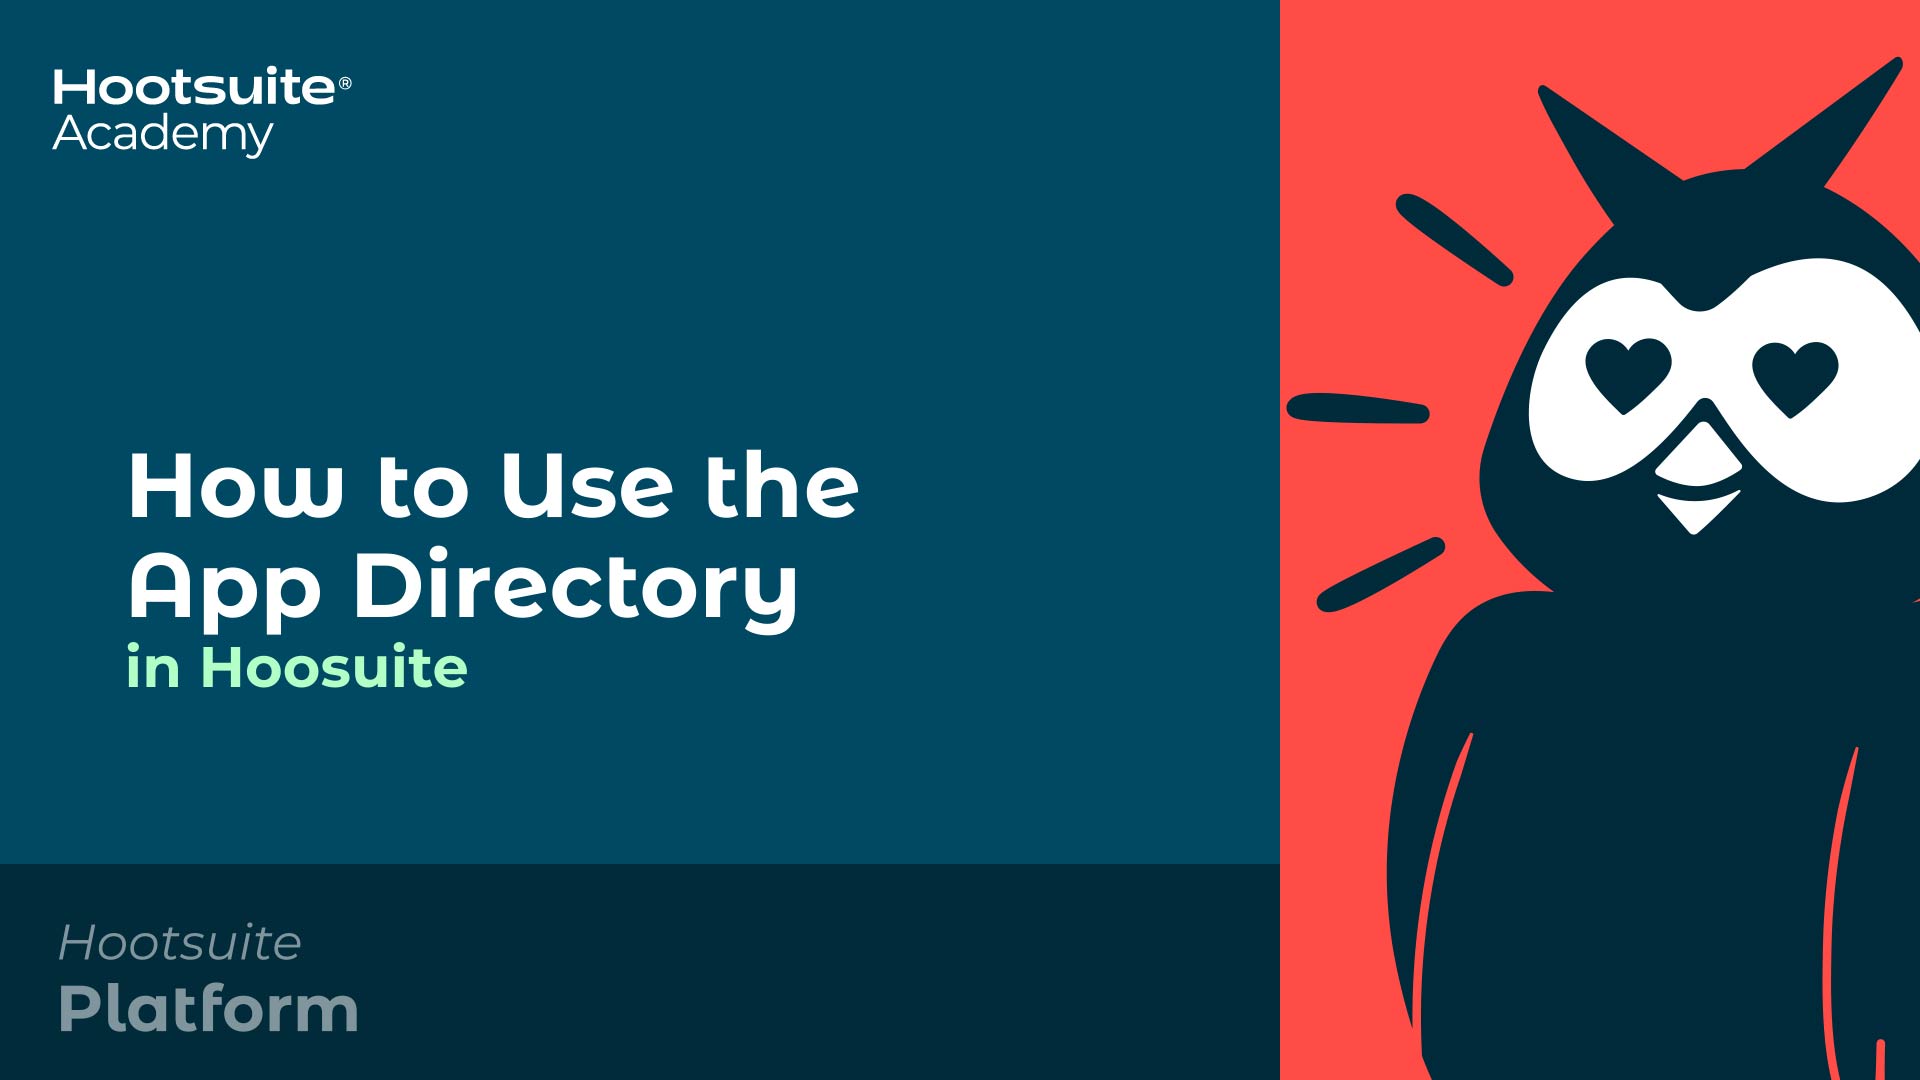 How to use the app directory in Hootsuite video.